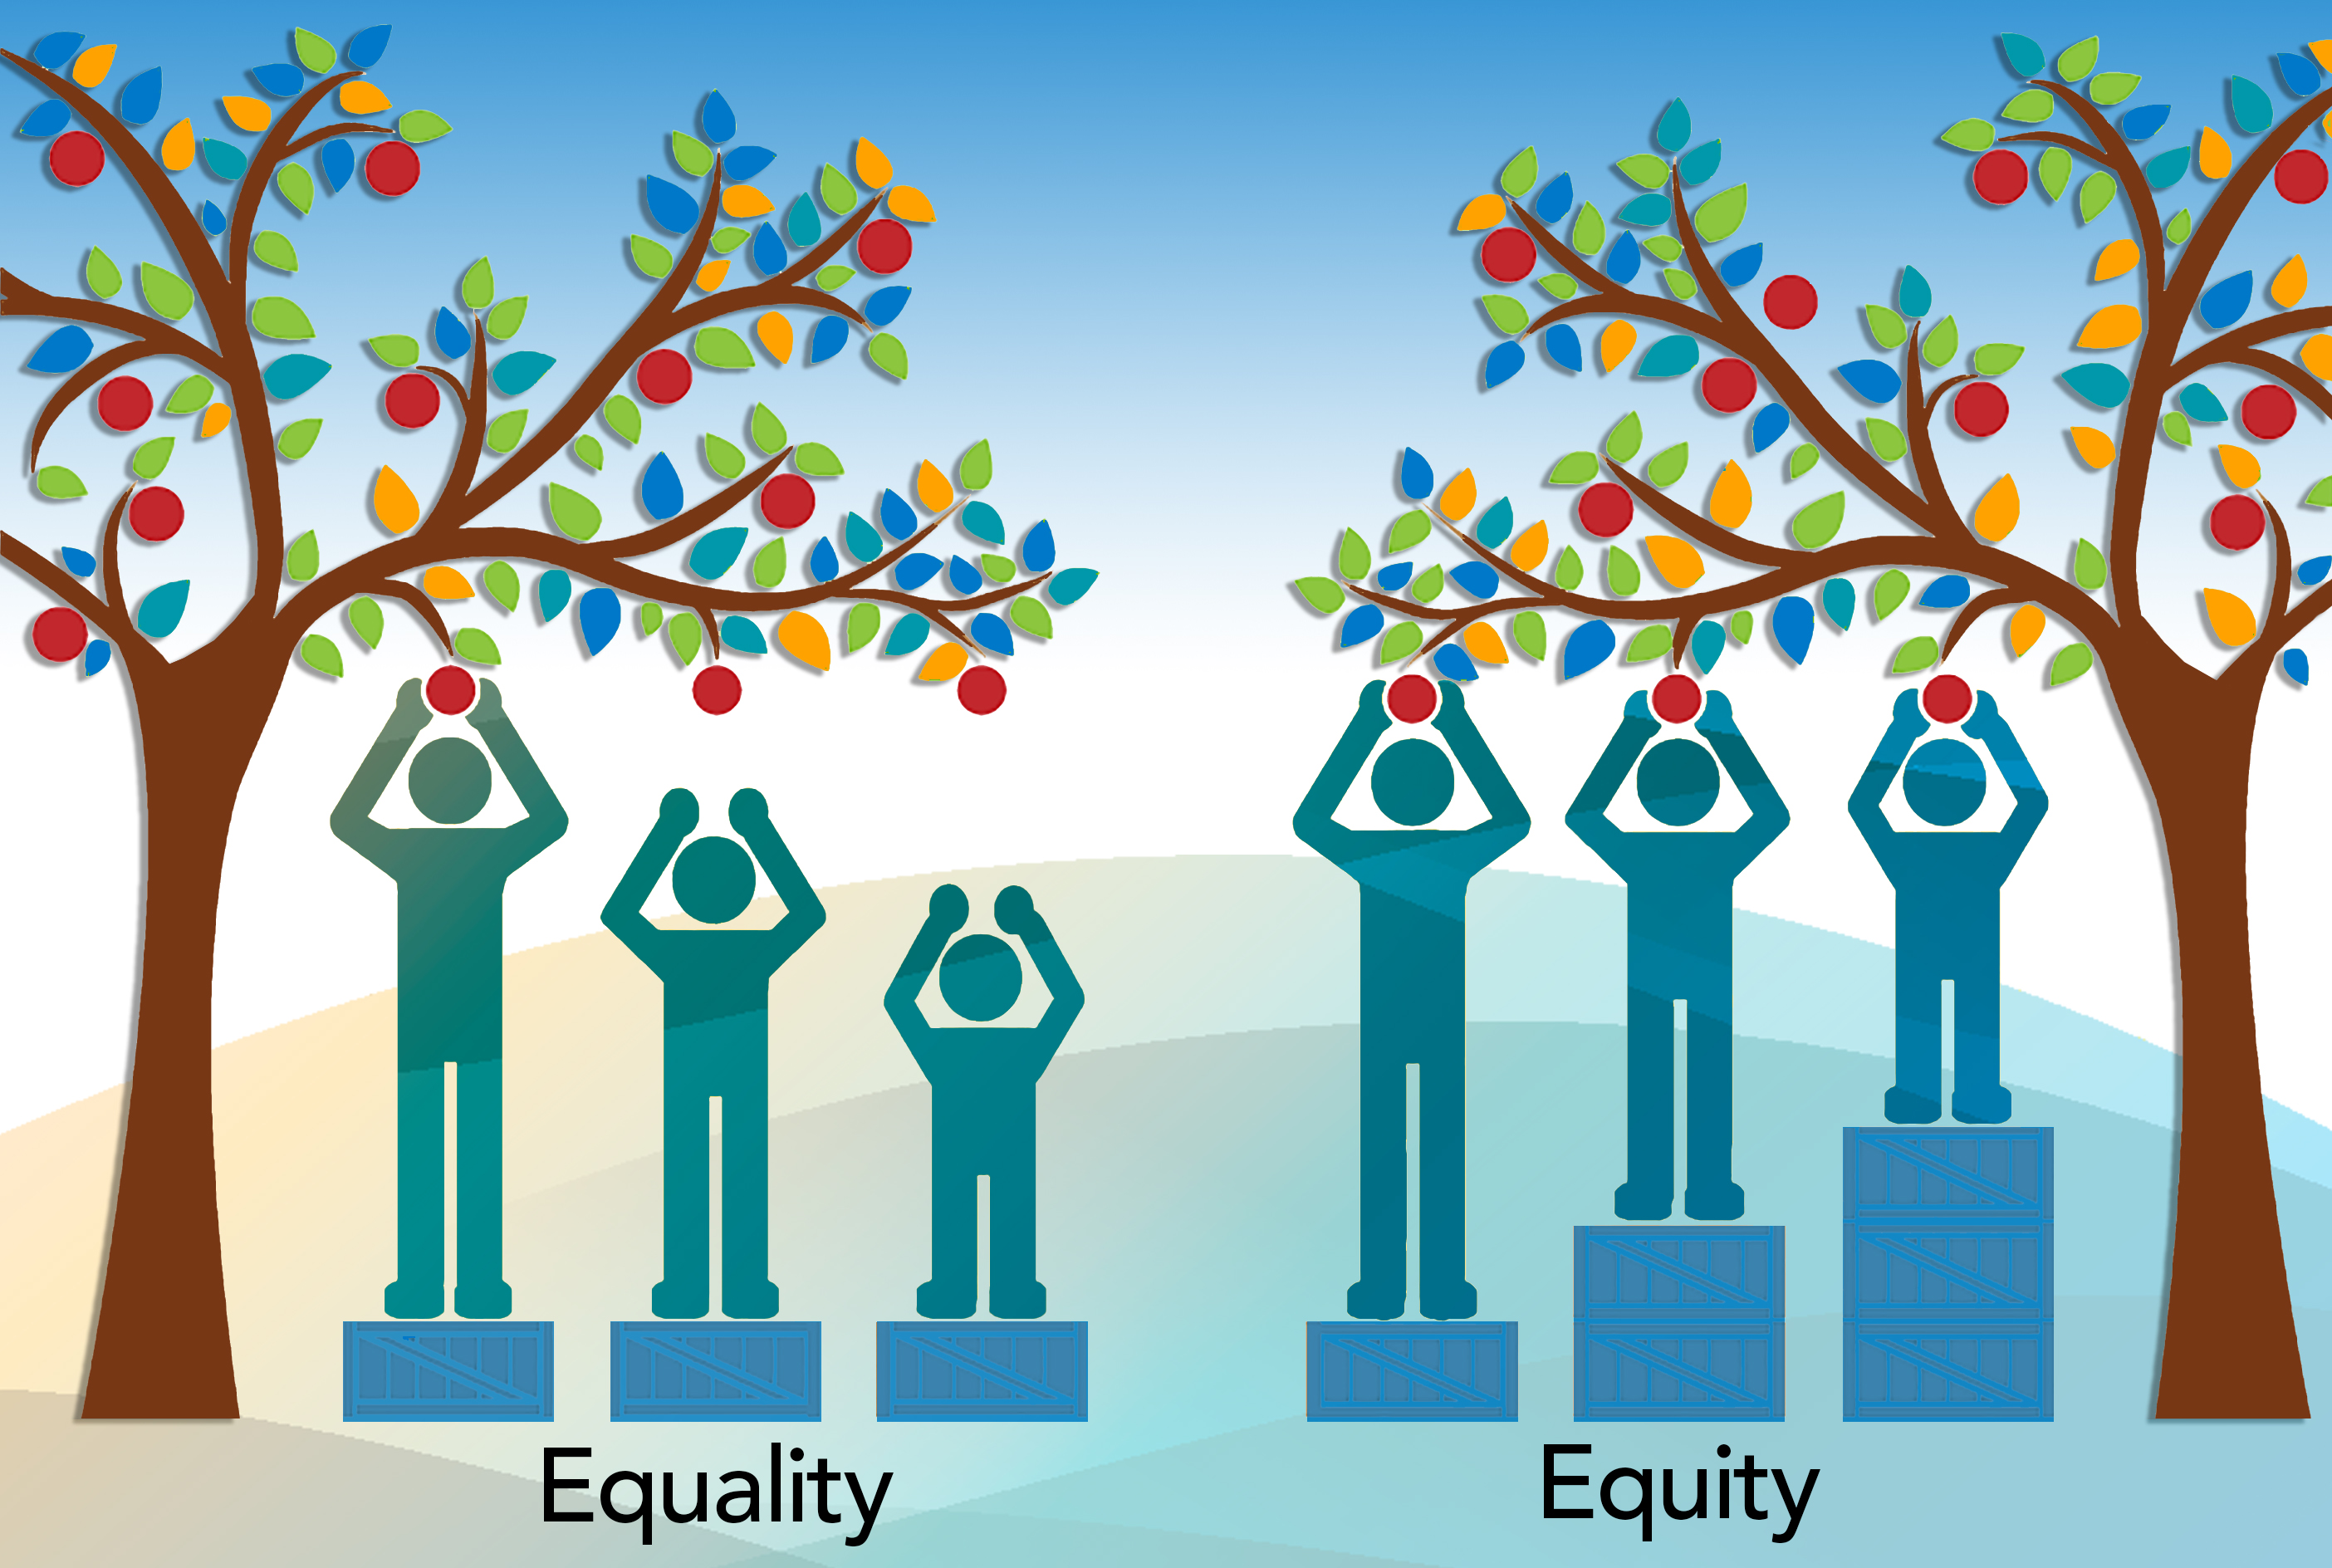 Gender & fisheries: Equality vs equity